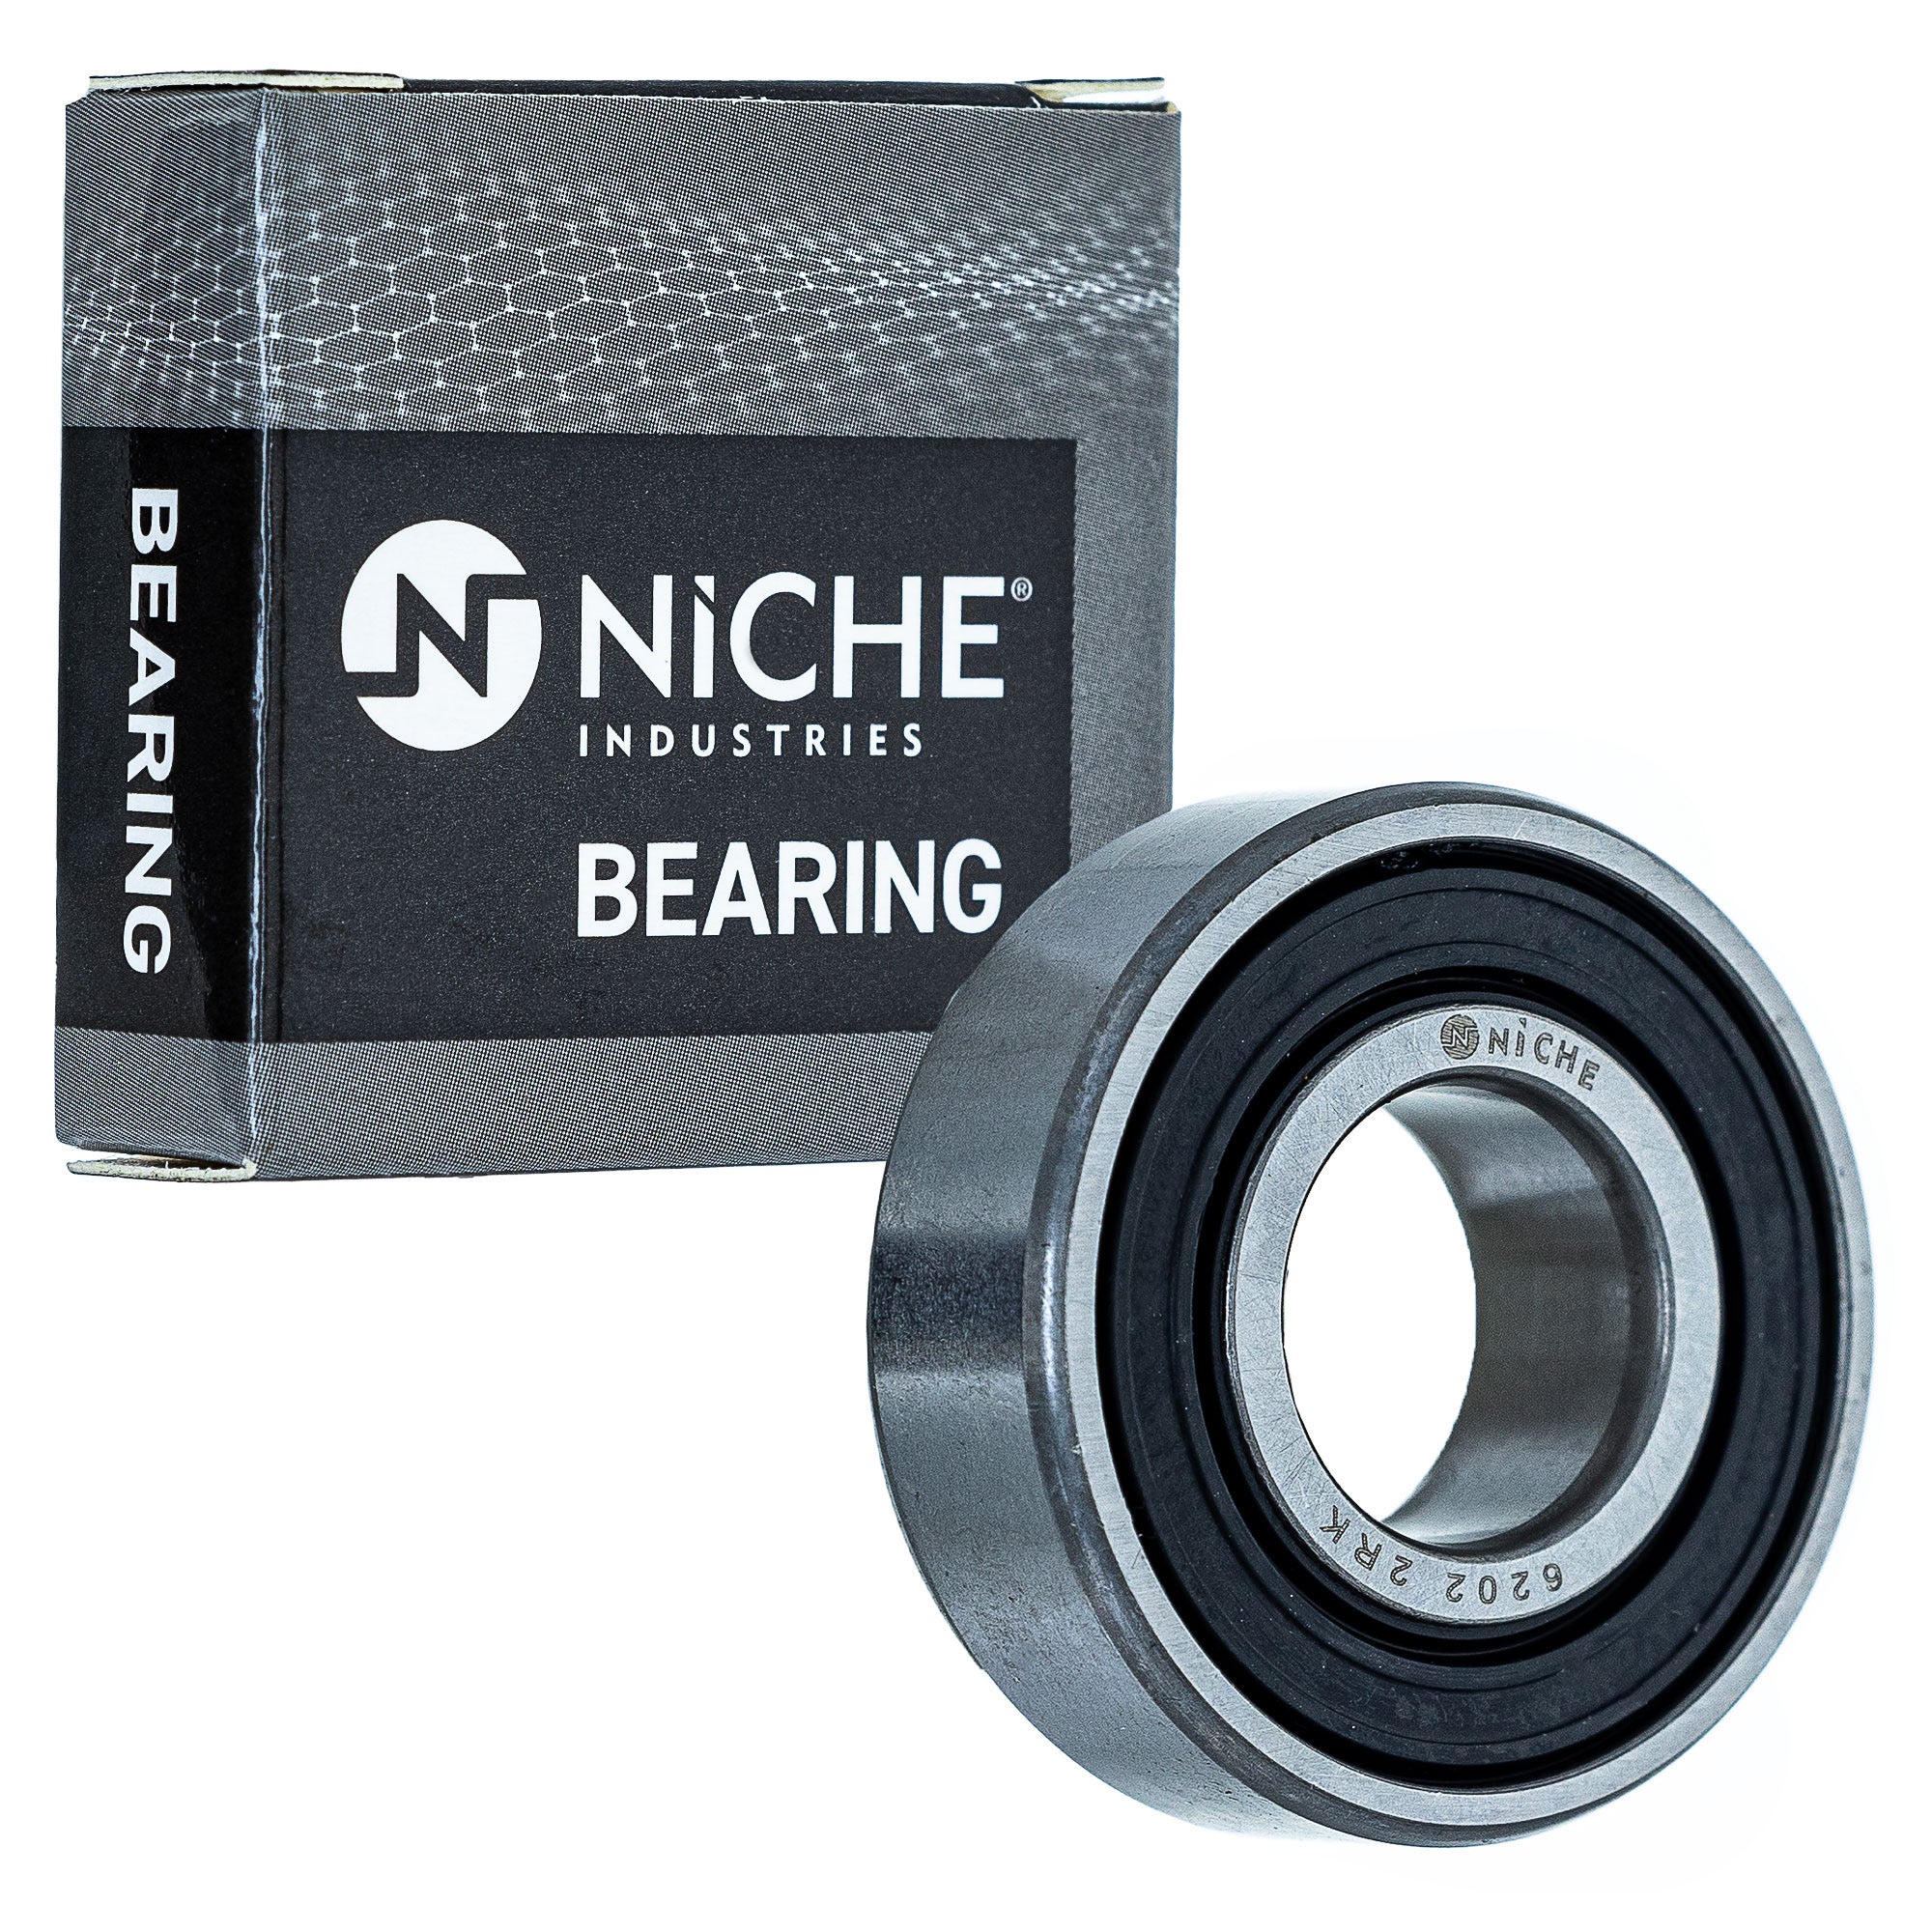 NICHE 519-CBB2298R Bearing 2-Pack for zOTHER PW50 Eliminator